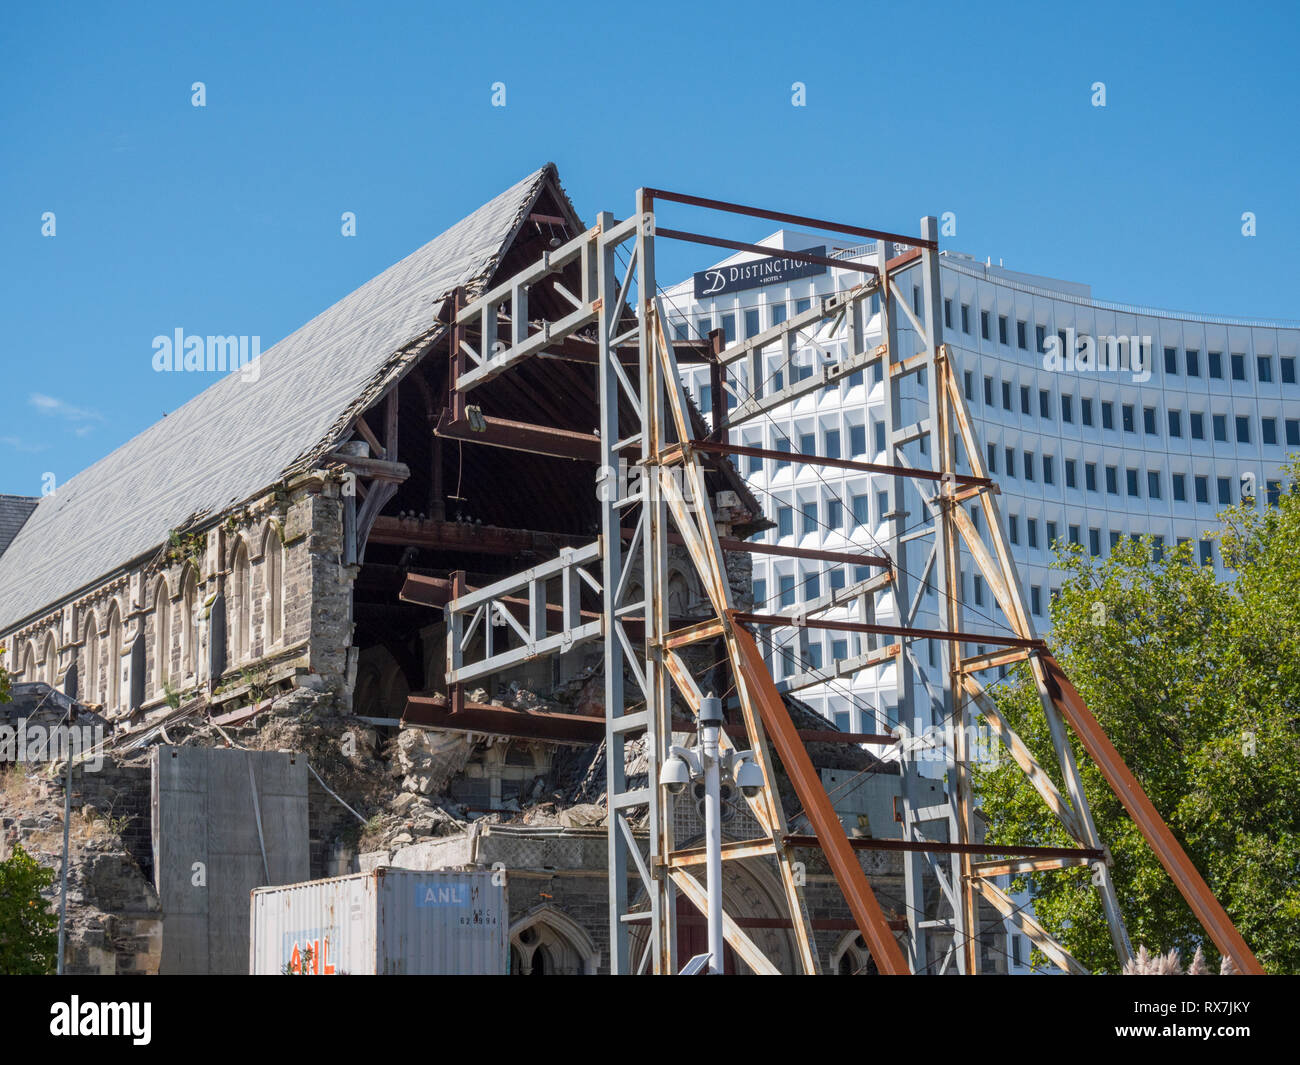 The earhquake damaged old Christchurch Cathedral New Zealand showing the metal protective scaffolding keeping it safe from further damage Stock Photo